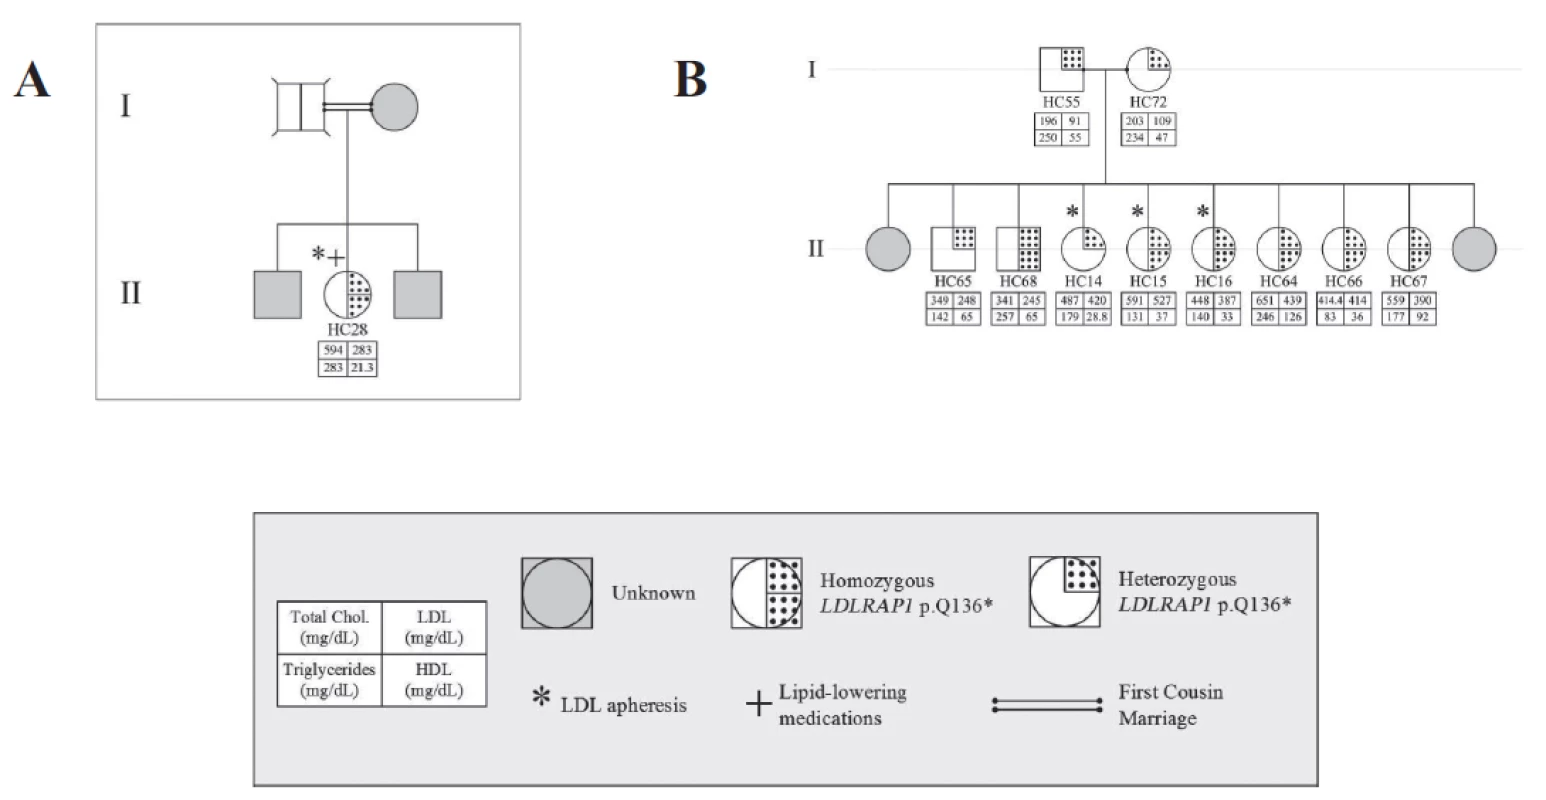 Familial cases of &lt;i&gt;LDLRAP1&lt;/i&gt;. Pedigrees of two families A and B with only the p.Q136* variant and the associated phenotypes for each member.